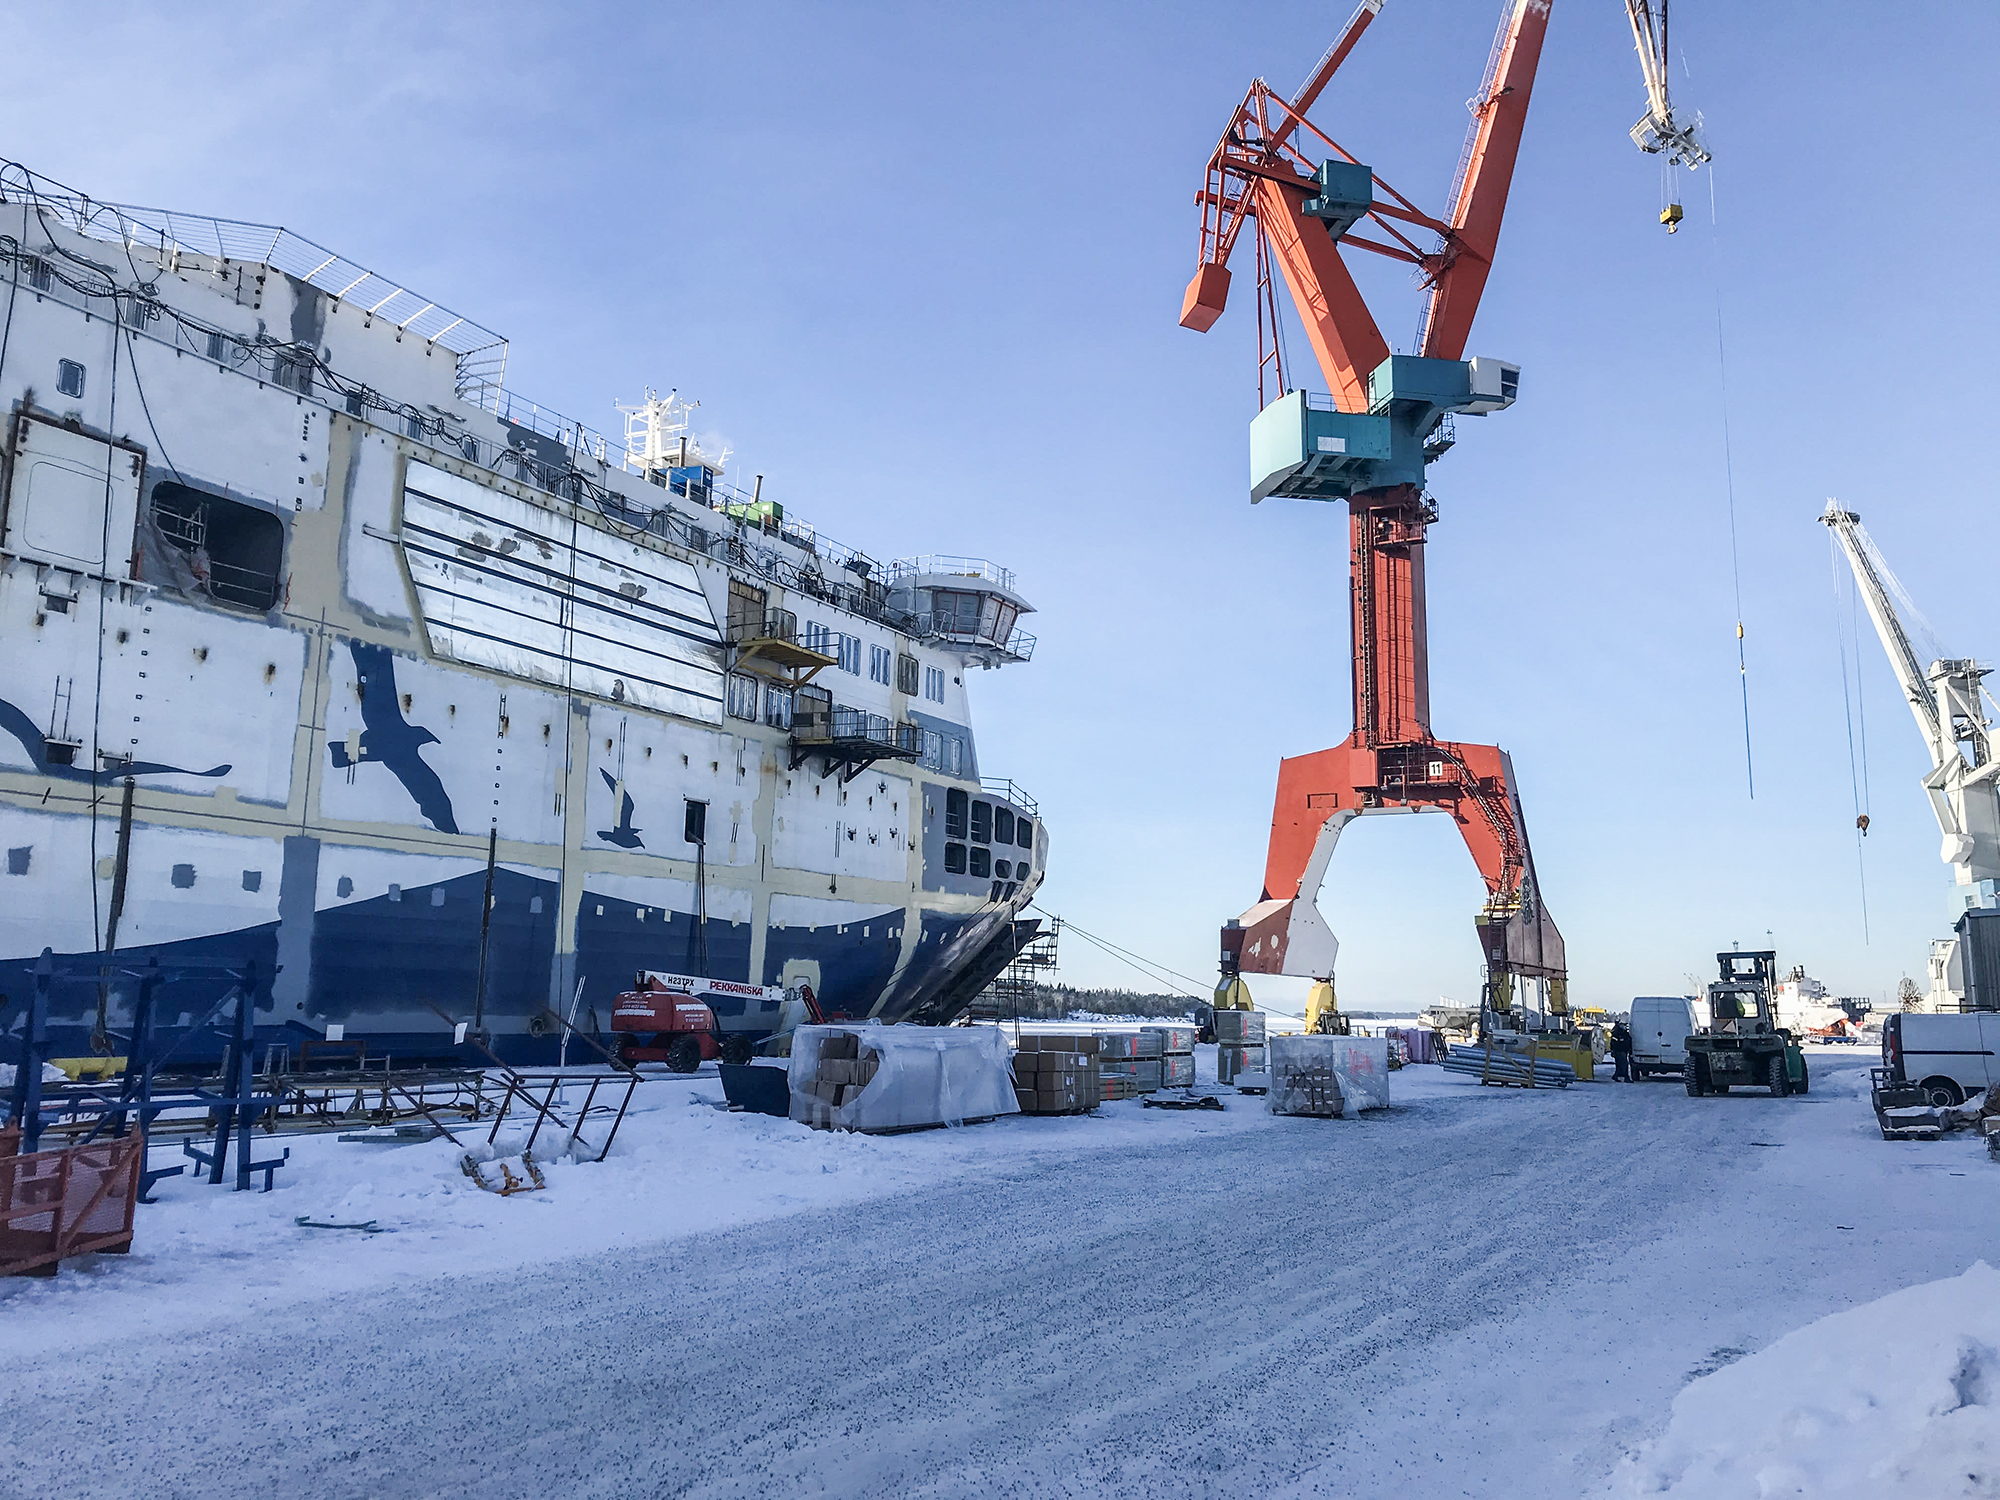 Rauma shipyard is delayed due to the outbreak of the coronavirus